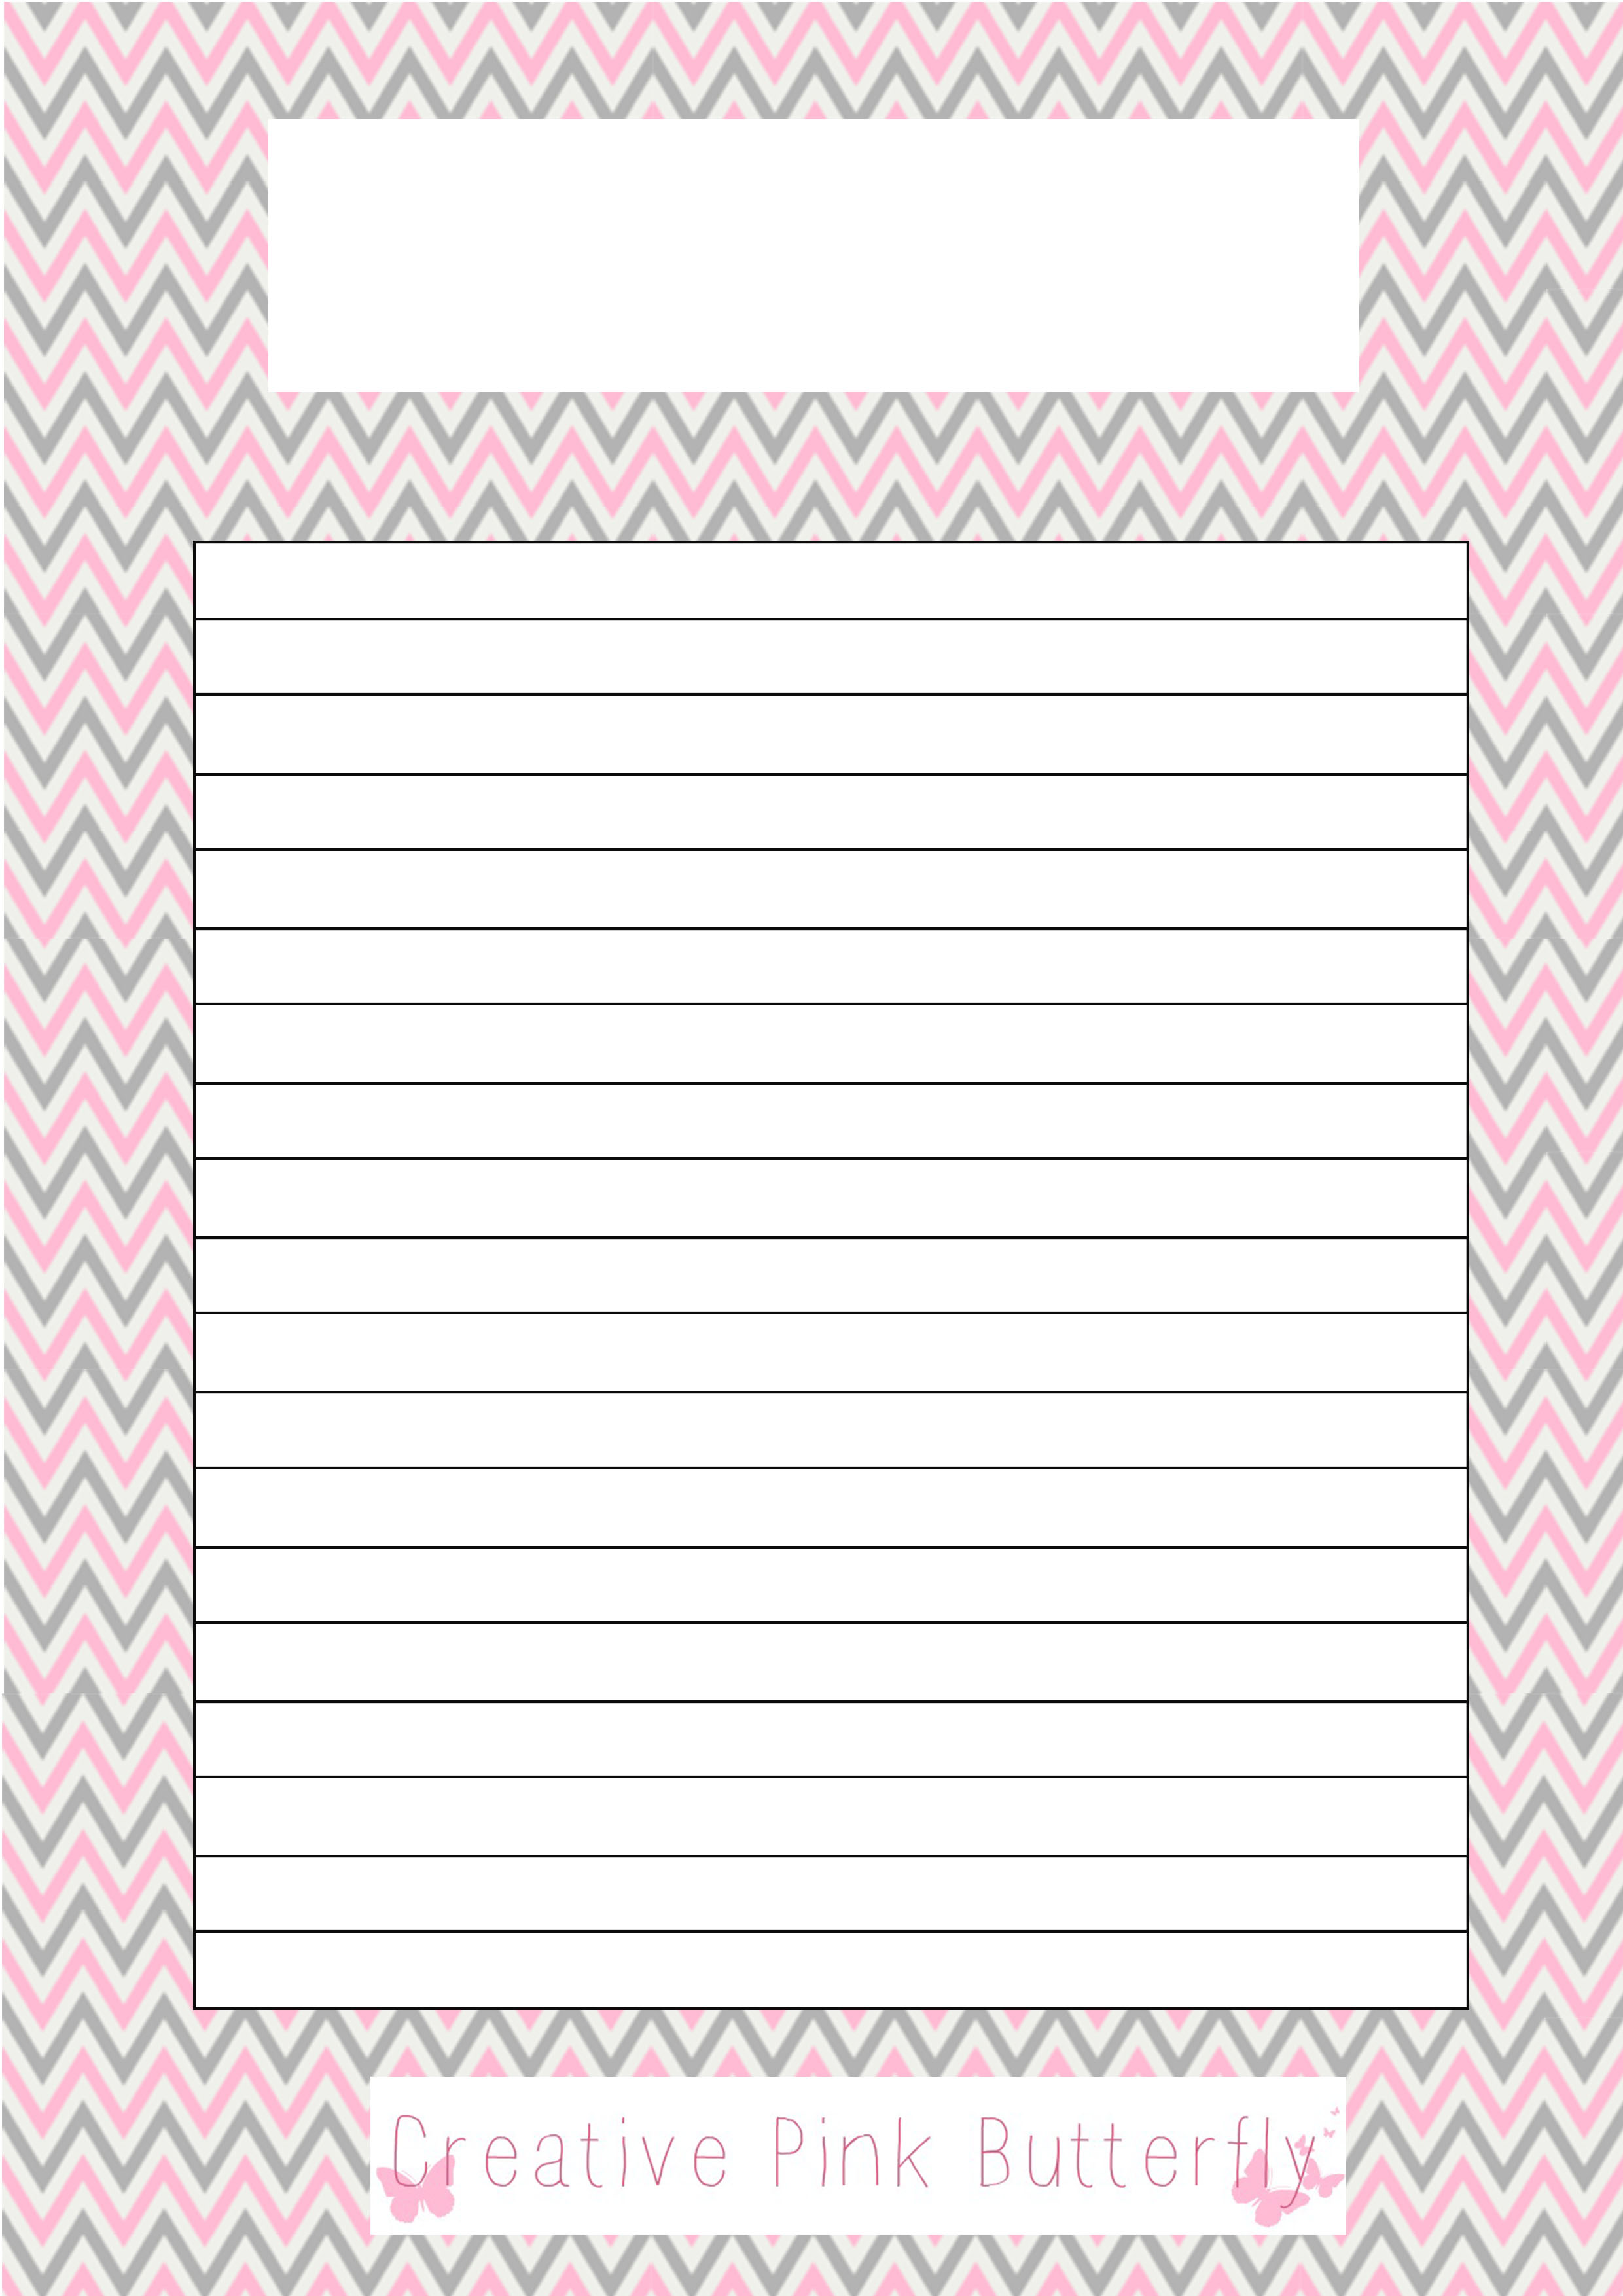 Lined Paper Template Word from creativepinkbutterfly.com